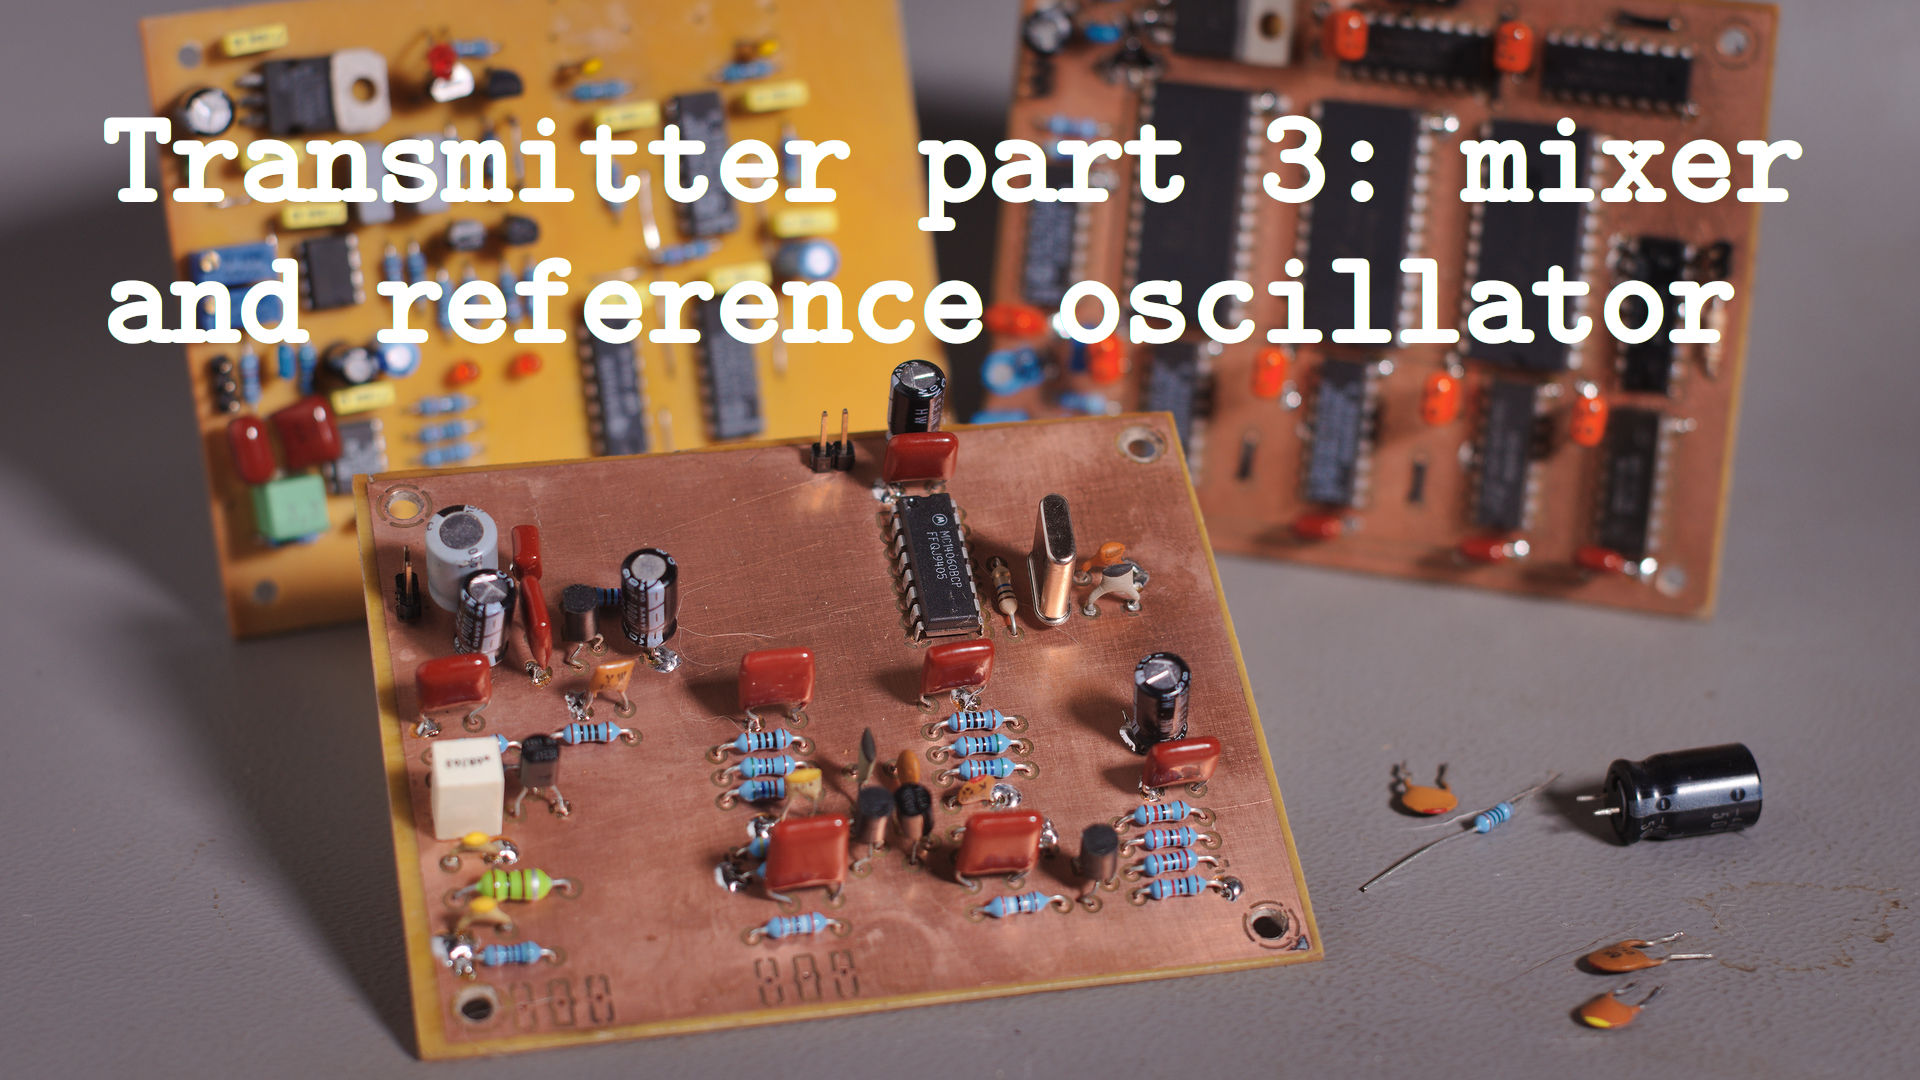 The design of the mixer and reference oscillator